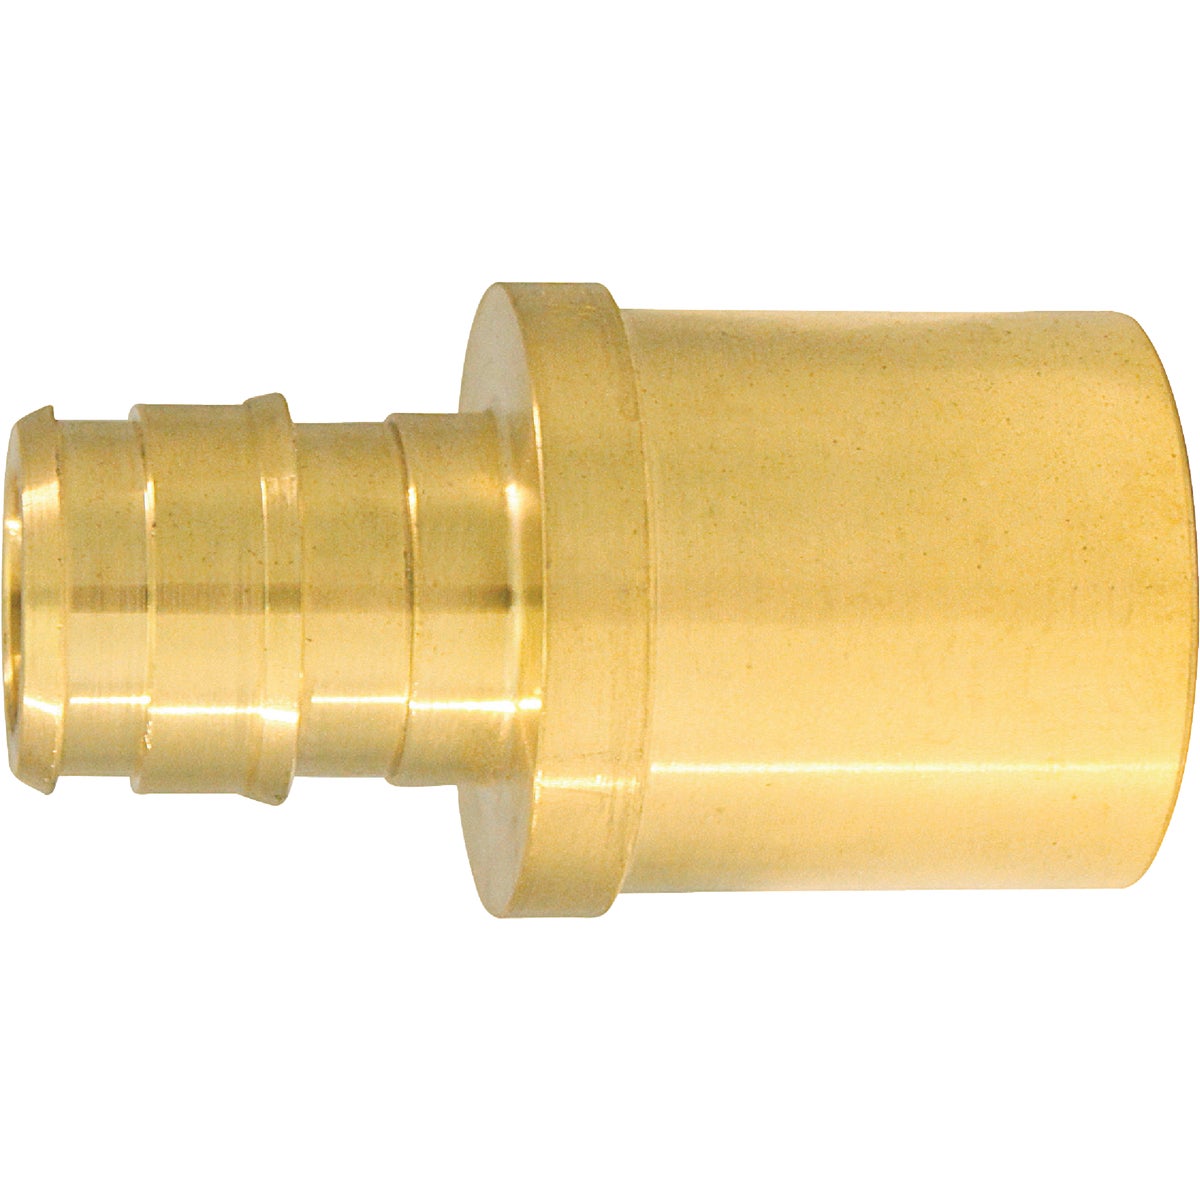 Apollo Retail 1/2 In. x 3/4 In. Brass Insert Fitting MSWT PEX A Adapter